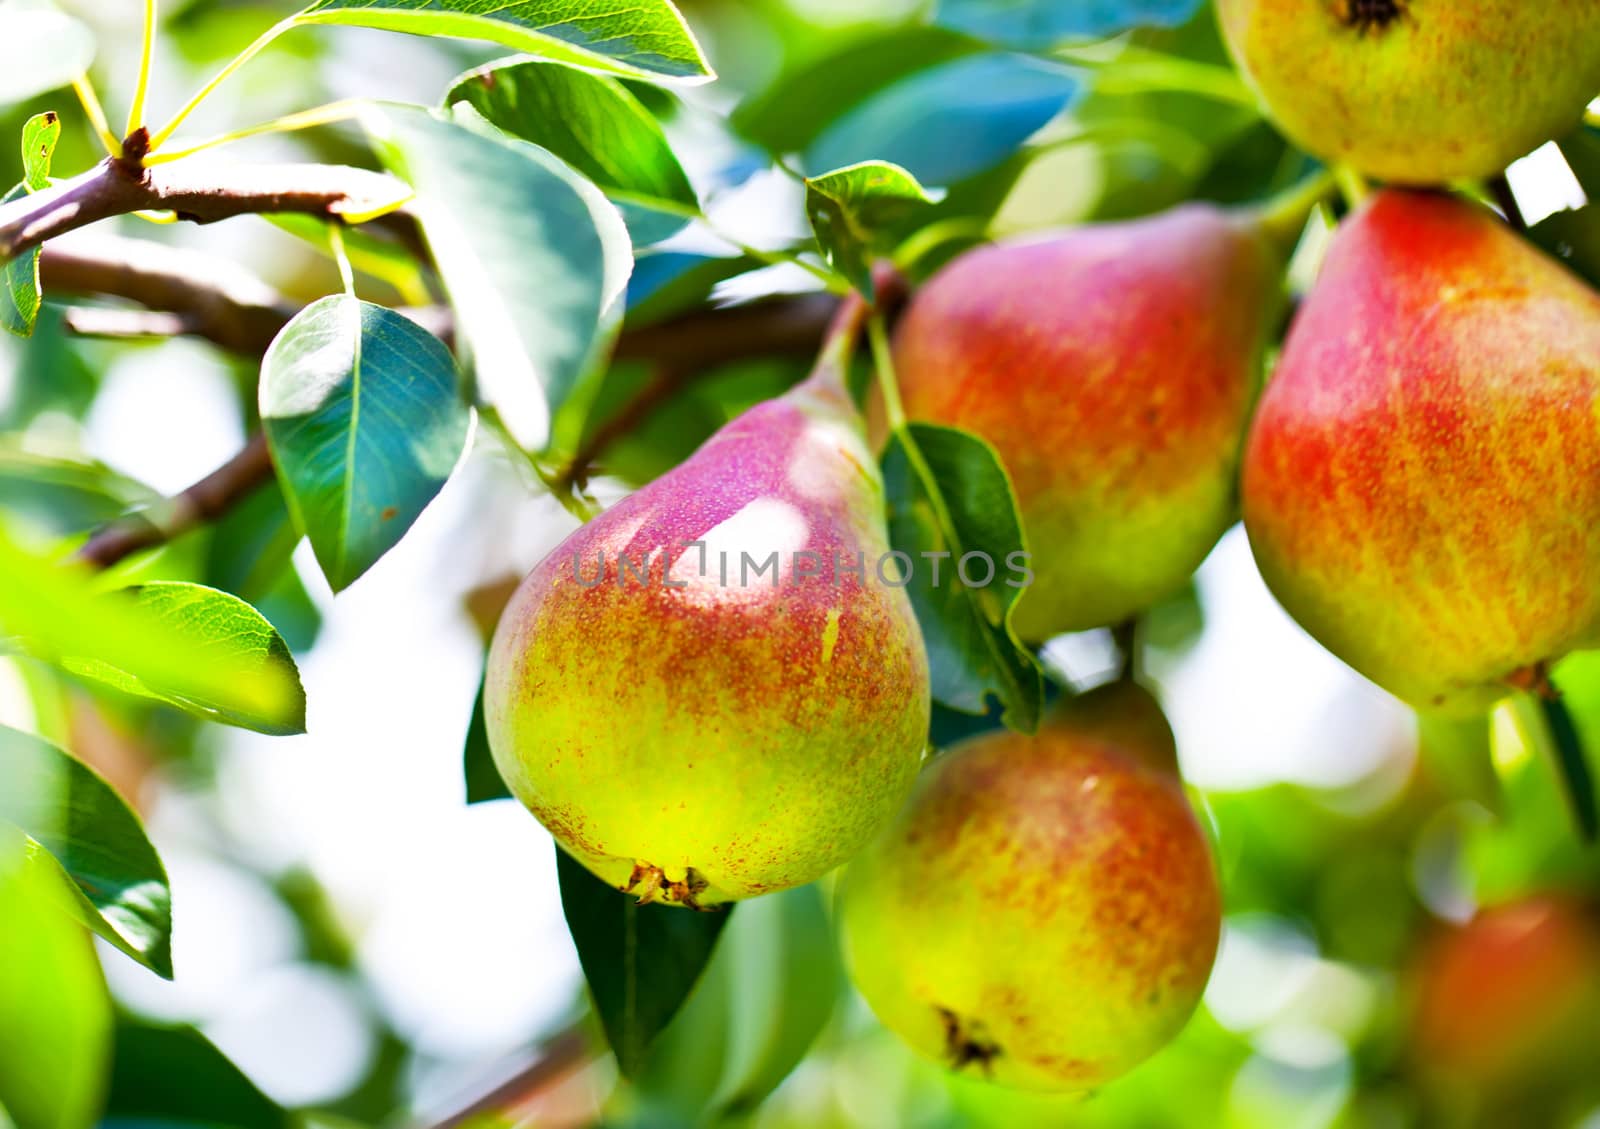 Beautiful pears on branch by RawGroup